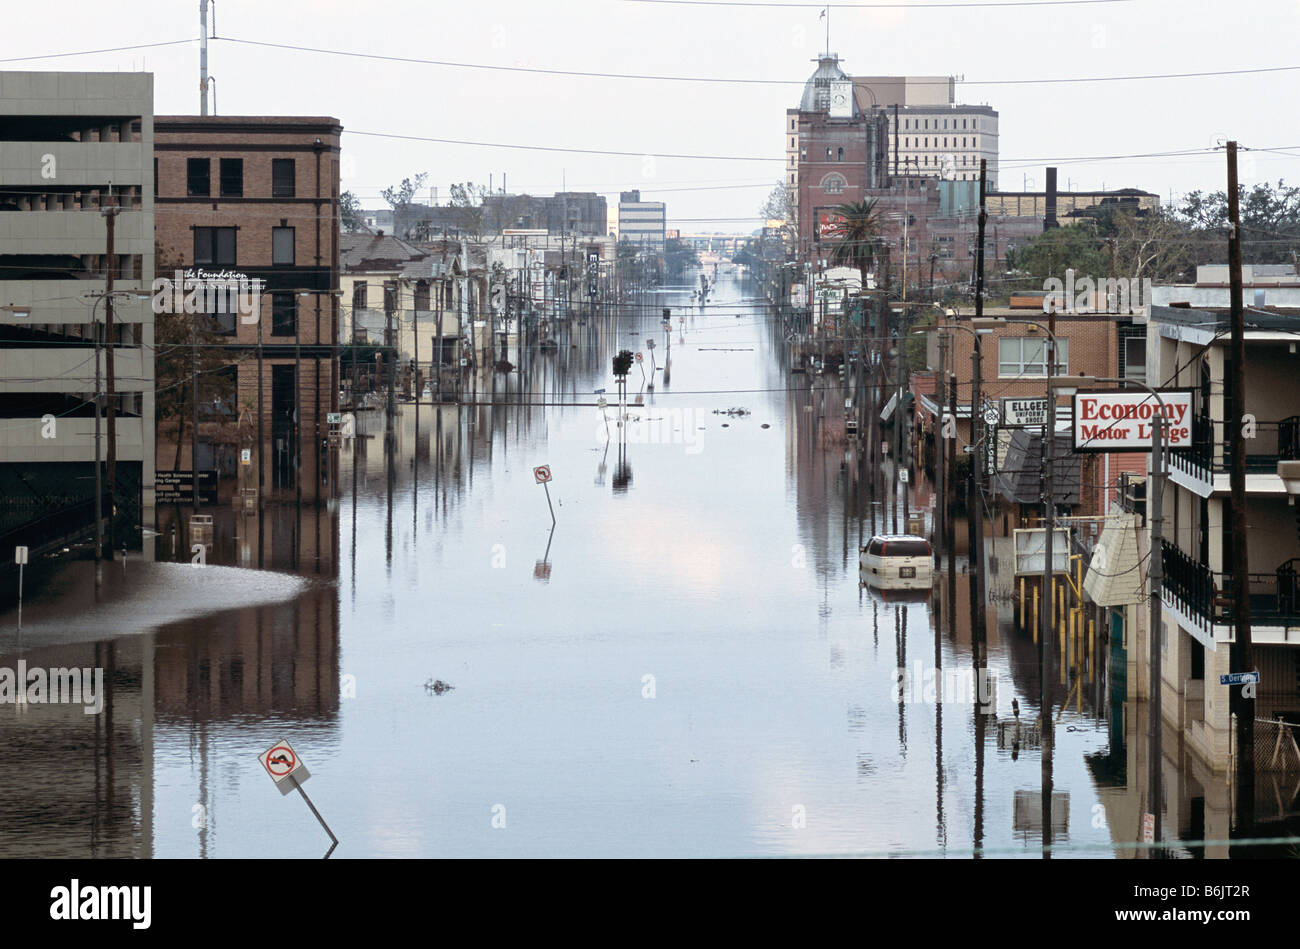 USA, New Orleans, Louisiana - Flood waters from a broken levee fill the city's streets after Hurricane Katrina has passed. Stock Photo